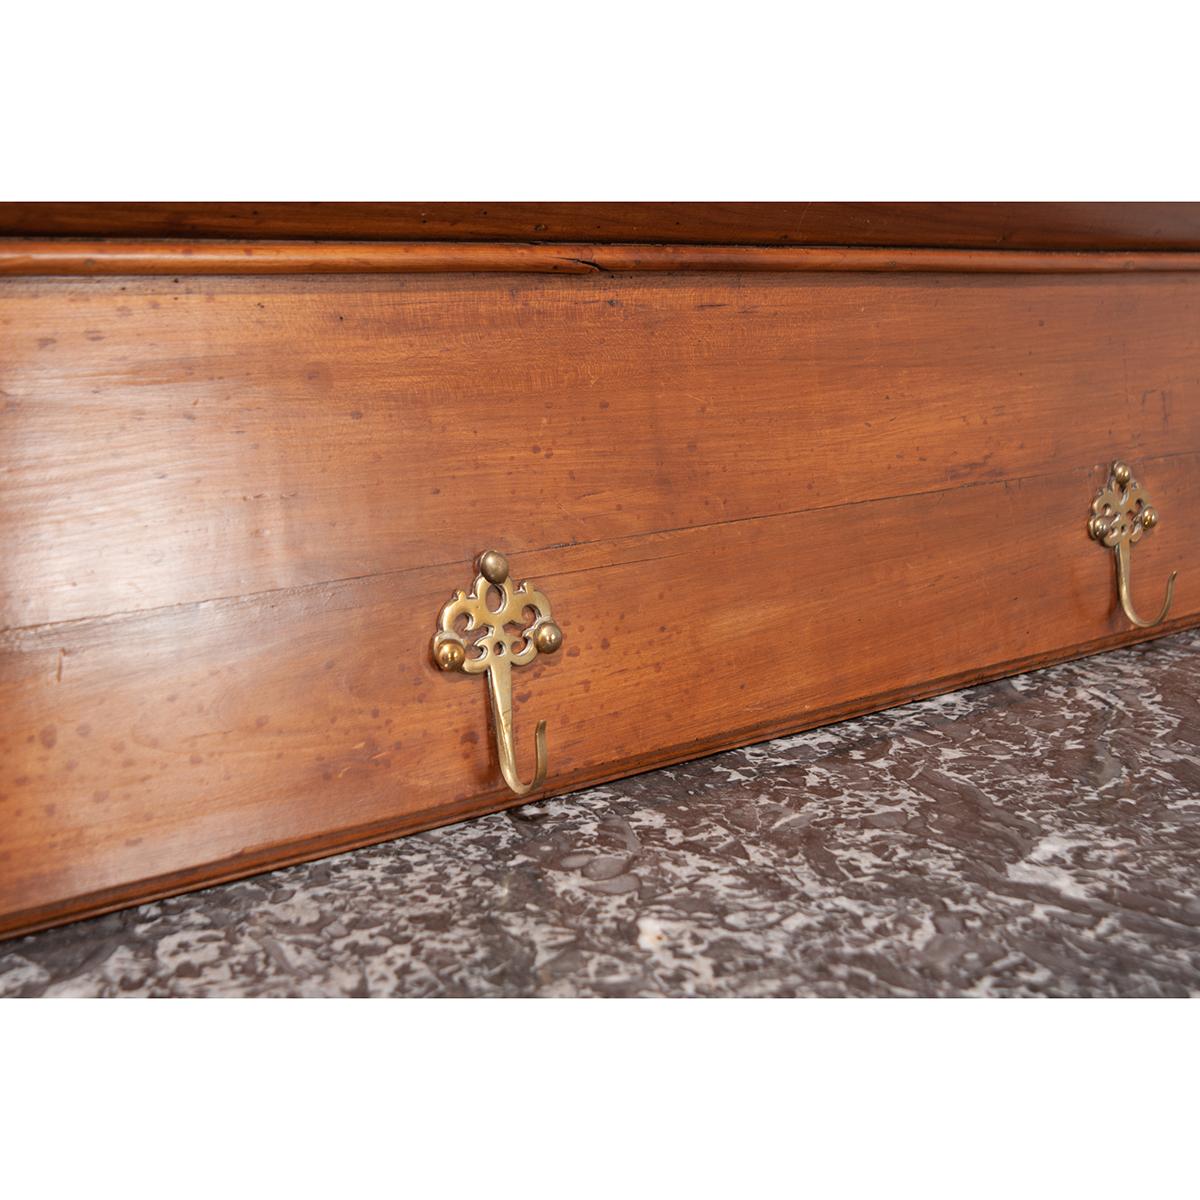 A charming French hat or coat rack, with a shelf. Six hooks are situated along a horizontal bar located under the shelf. The aged finish and uniquely shaped bracket supports give the piece a welcoming charm. This piece has so many possibilities,